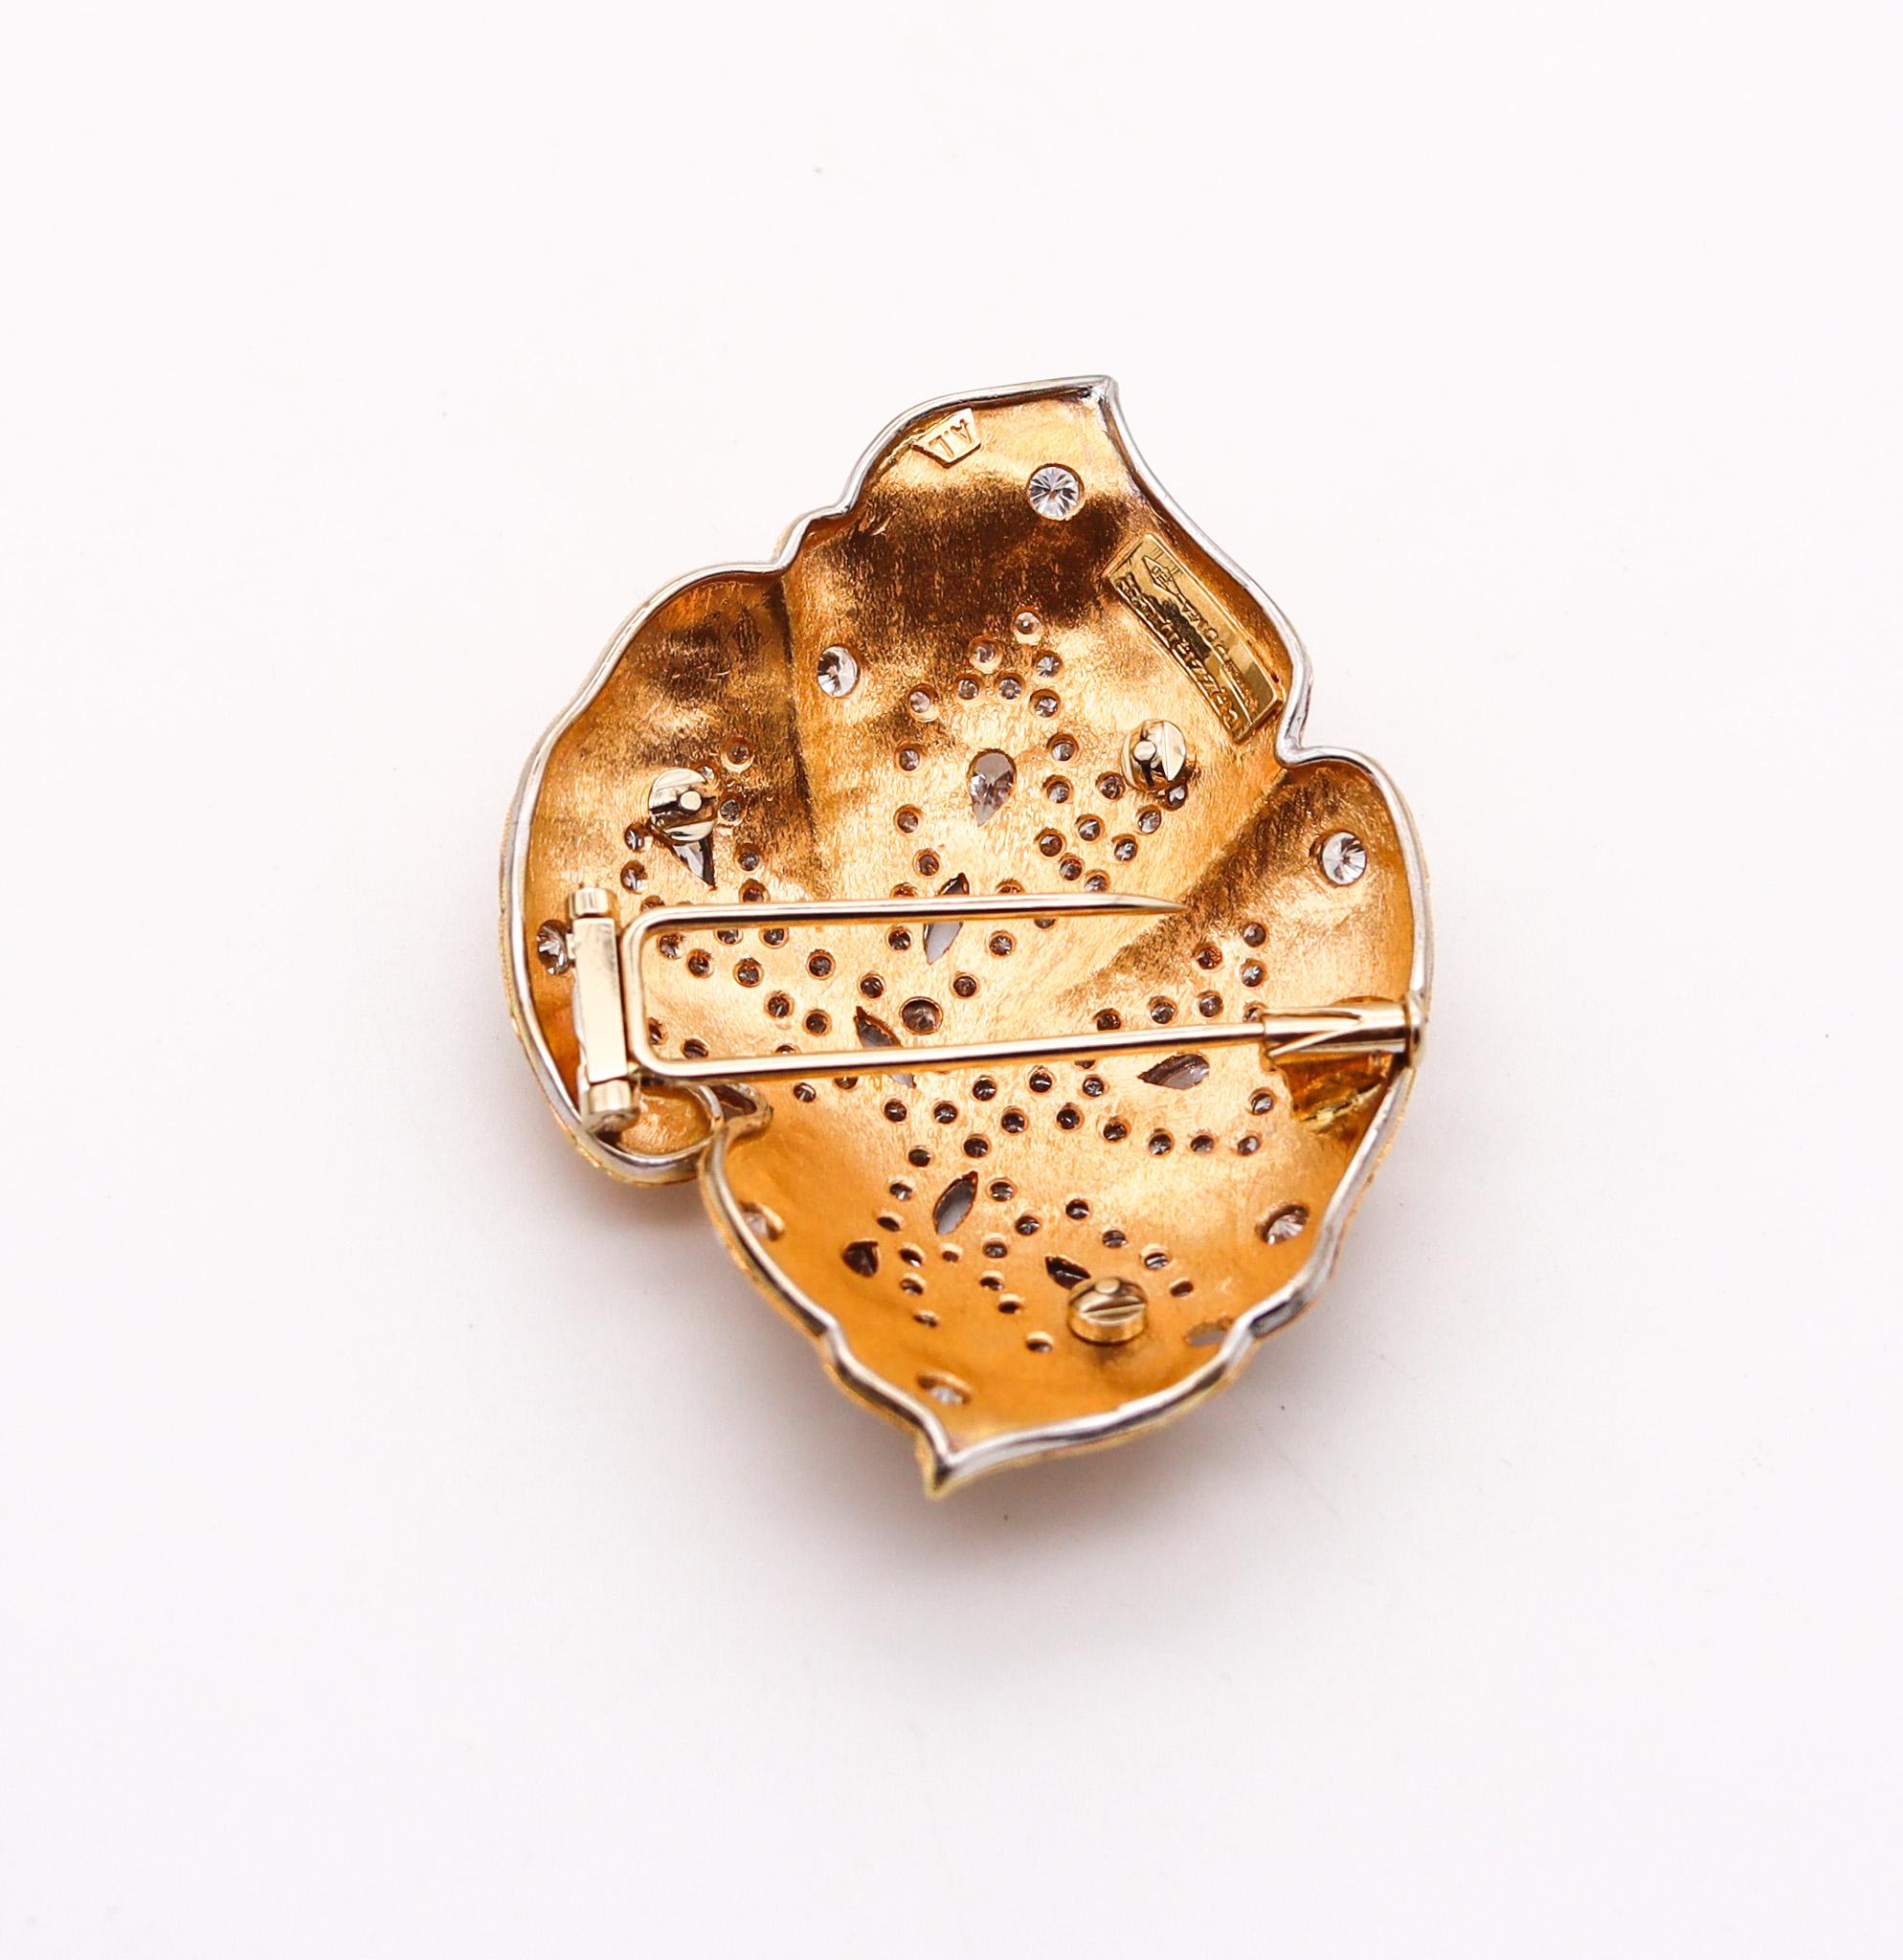 Baroque Revival Cazzaniga Roma 1970 Abstract Leaf Brooch in 18kt Gold with 6.25 Ctw in Diamonds